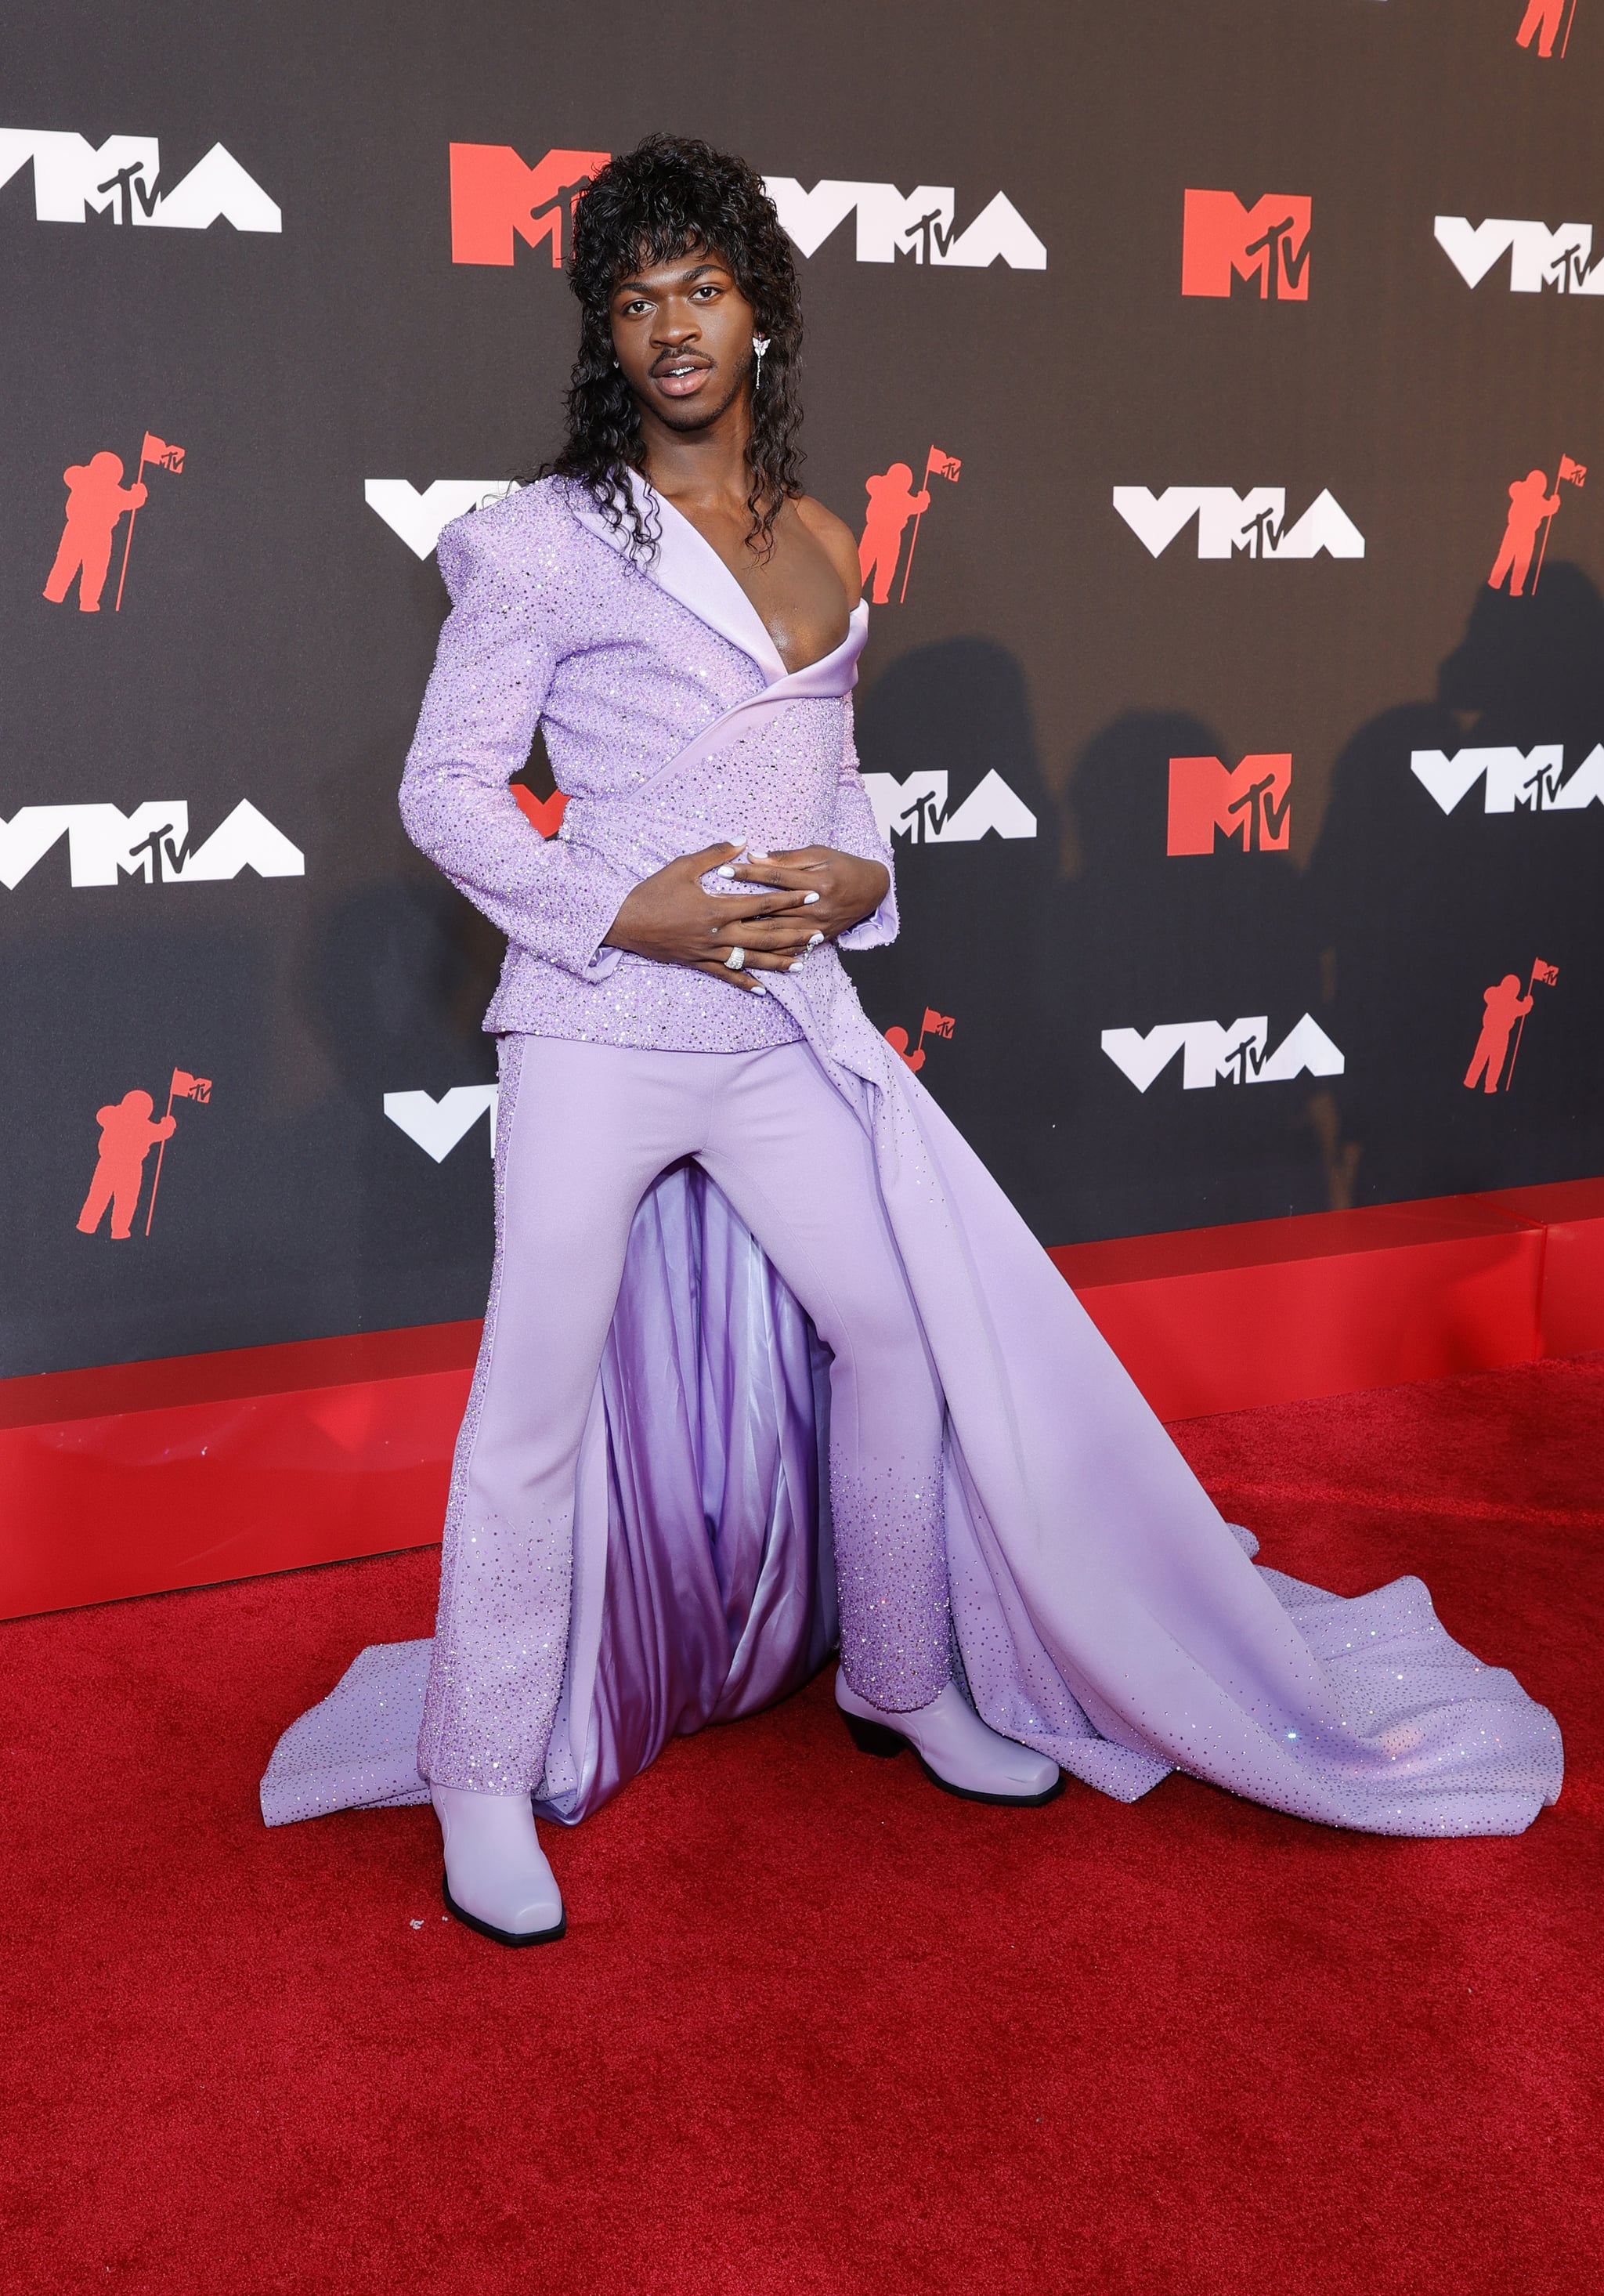 Fashion, Shopping & Style | Lil Nas X Lit the VMAs Red Carpet Up With  Purple in His Fabulous Embellished Suit | POPSUGAR Fashion Photo 18